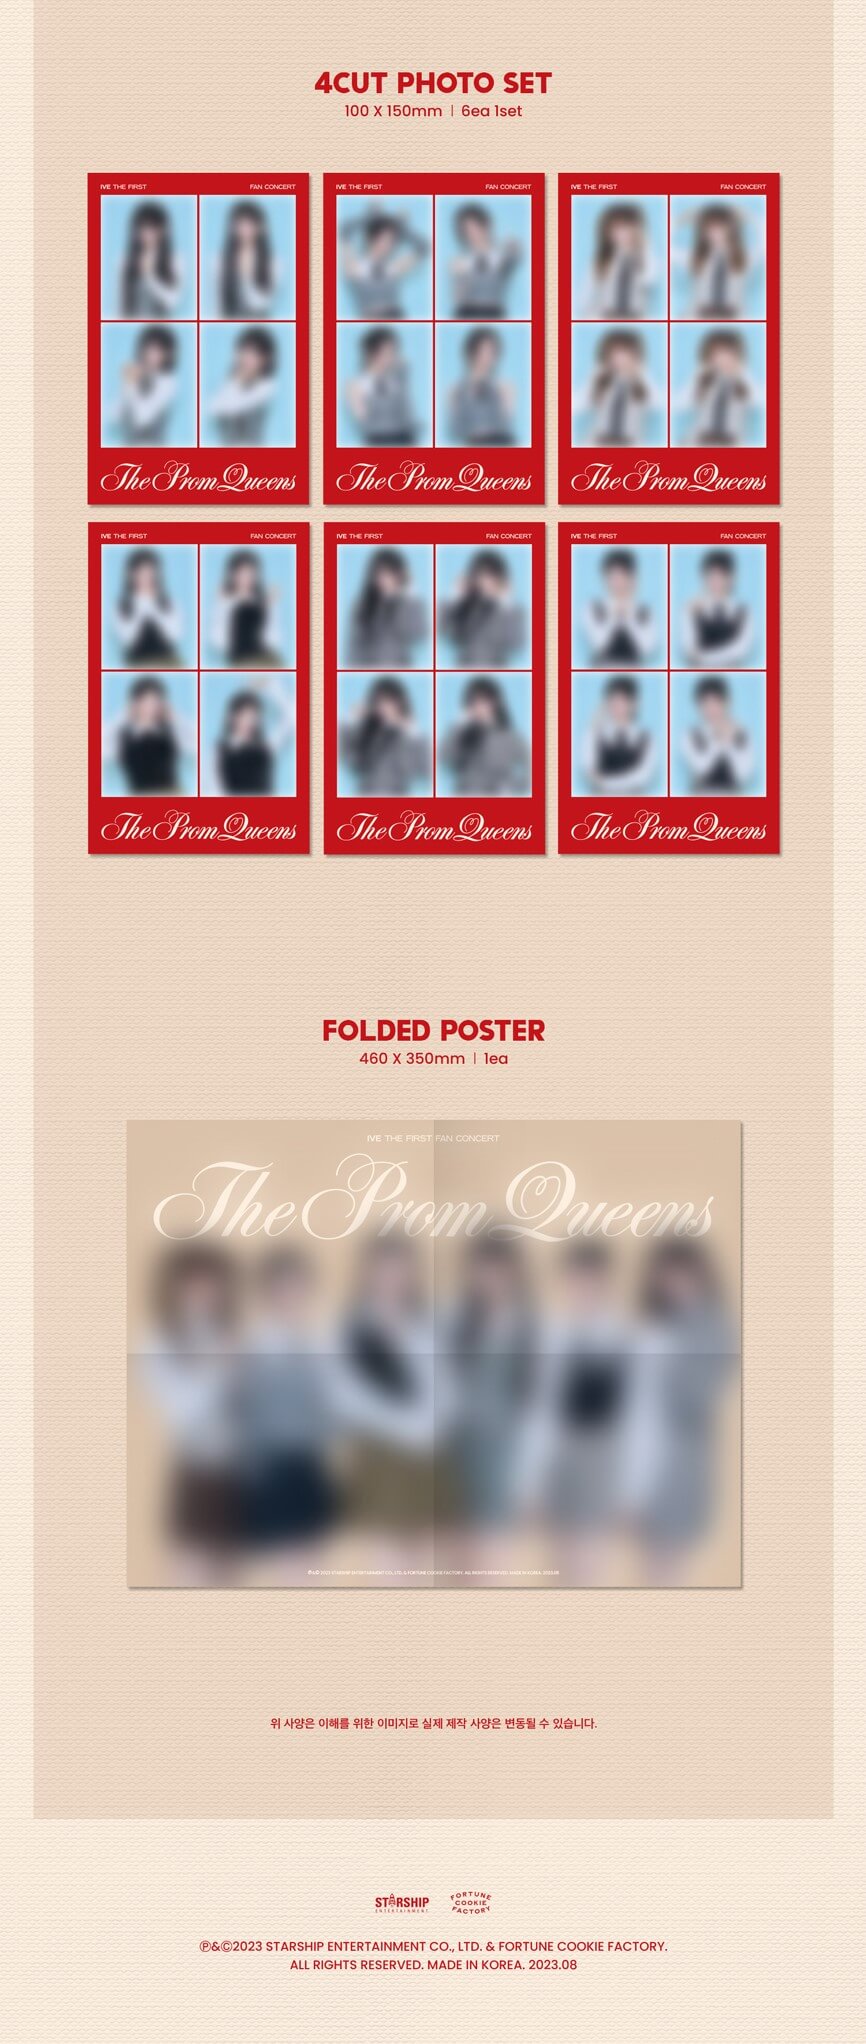 IVE THE FIRST FAN CONCERT The Prom Queens Blu-ray Inclusions 4Cut Photo Set Folded Poster